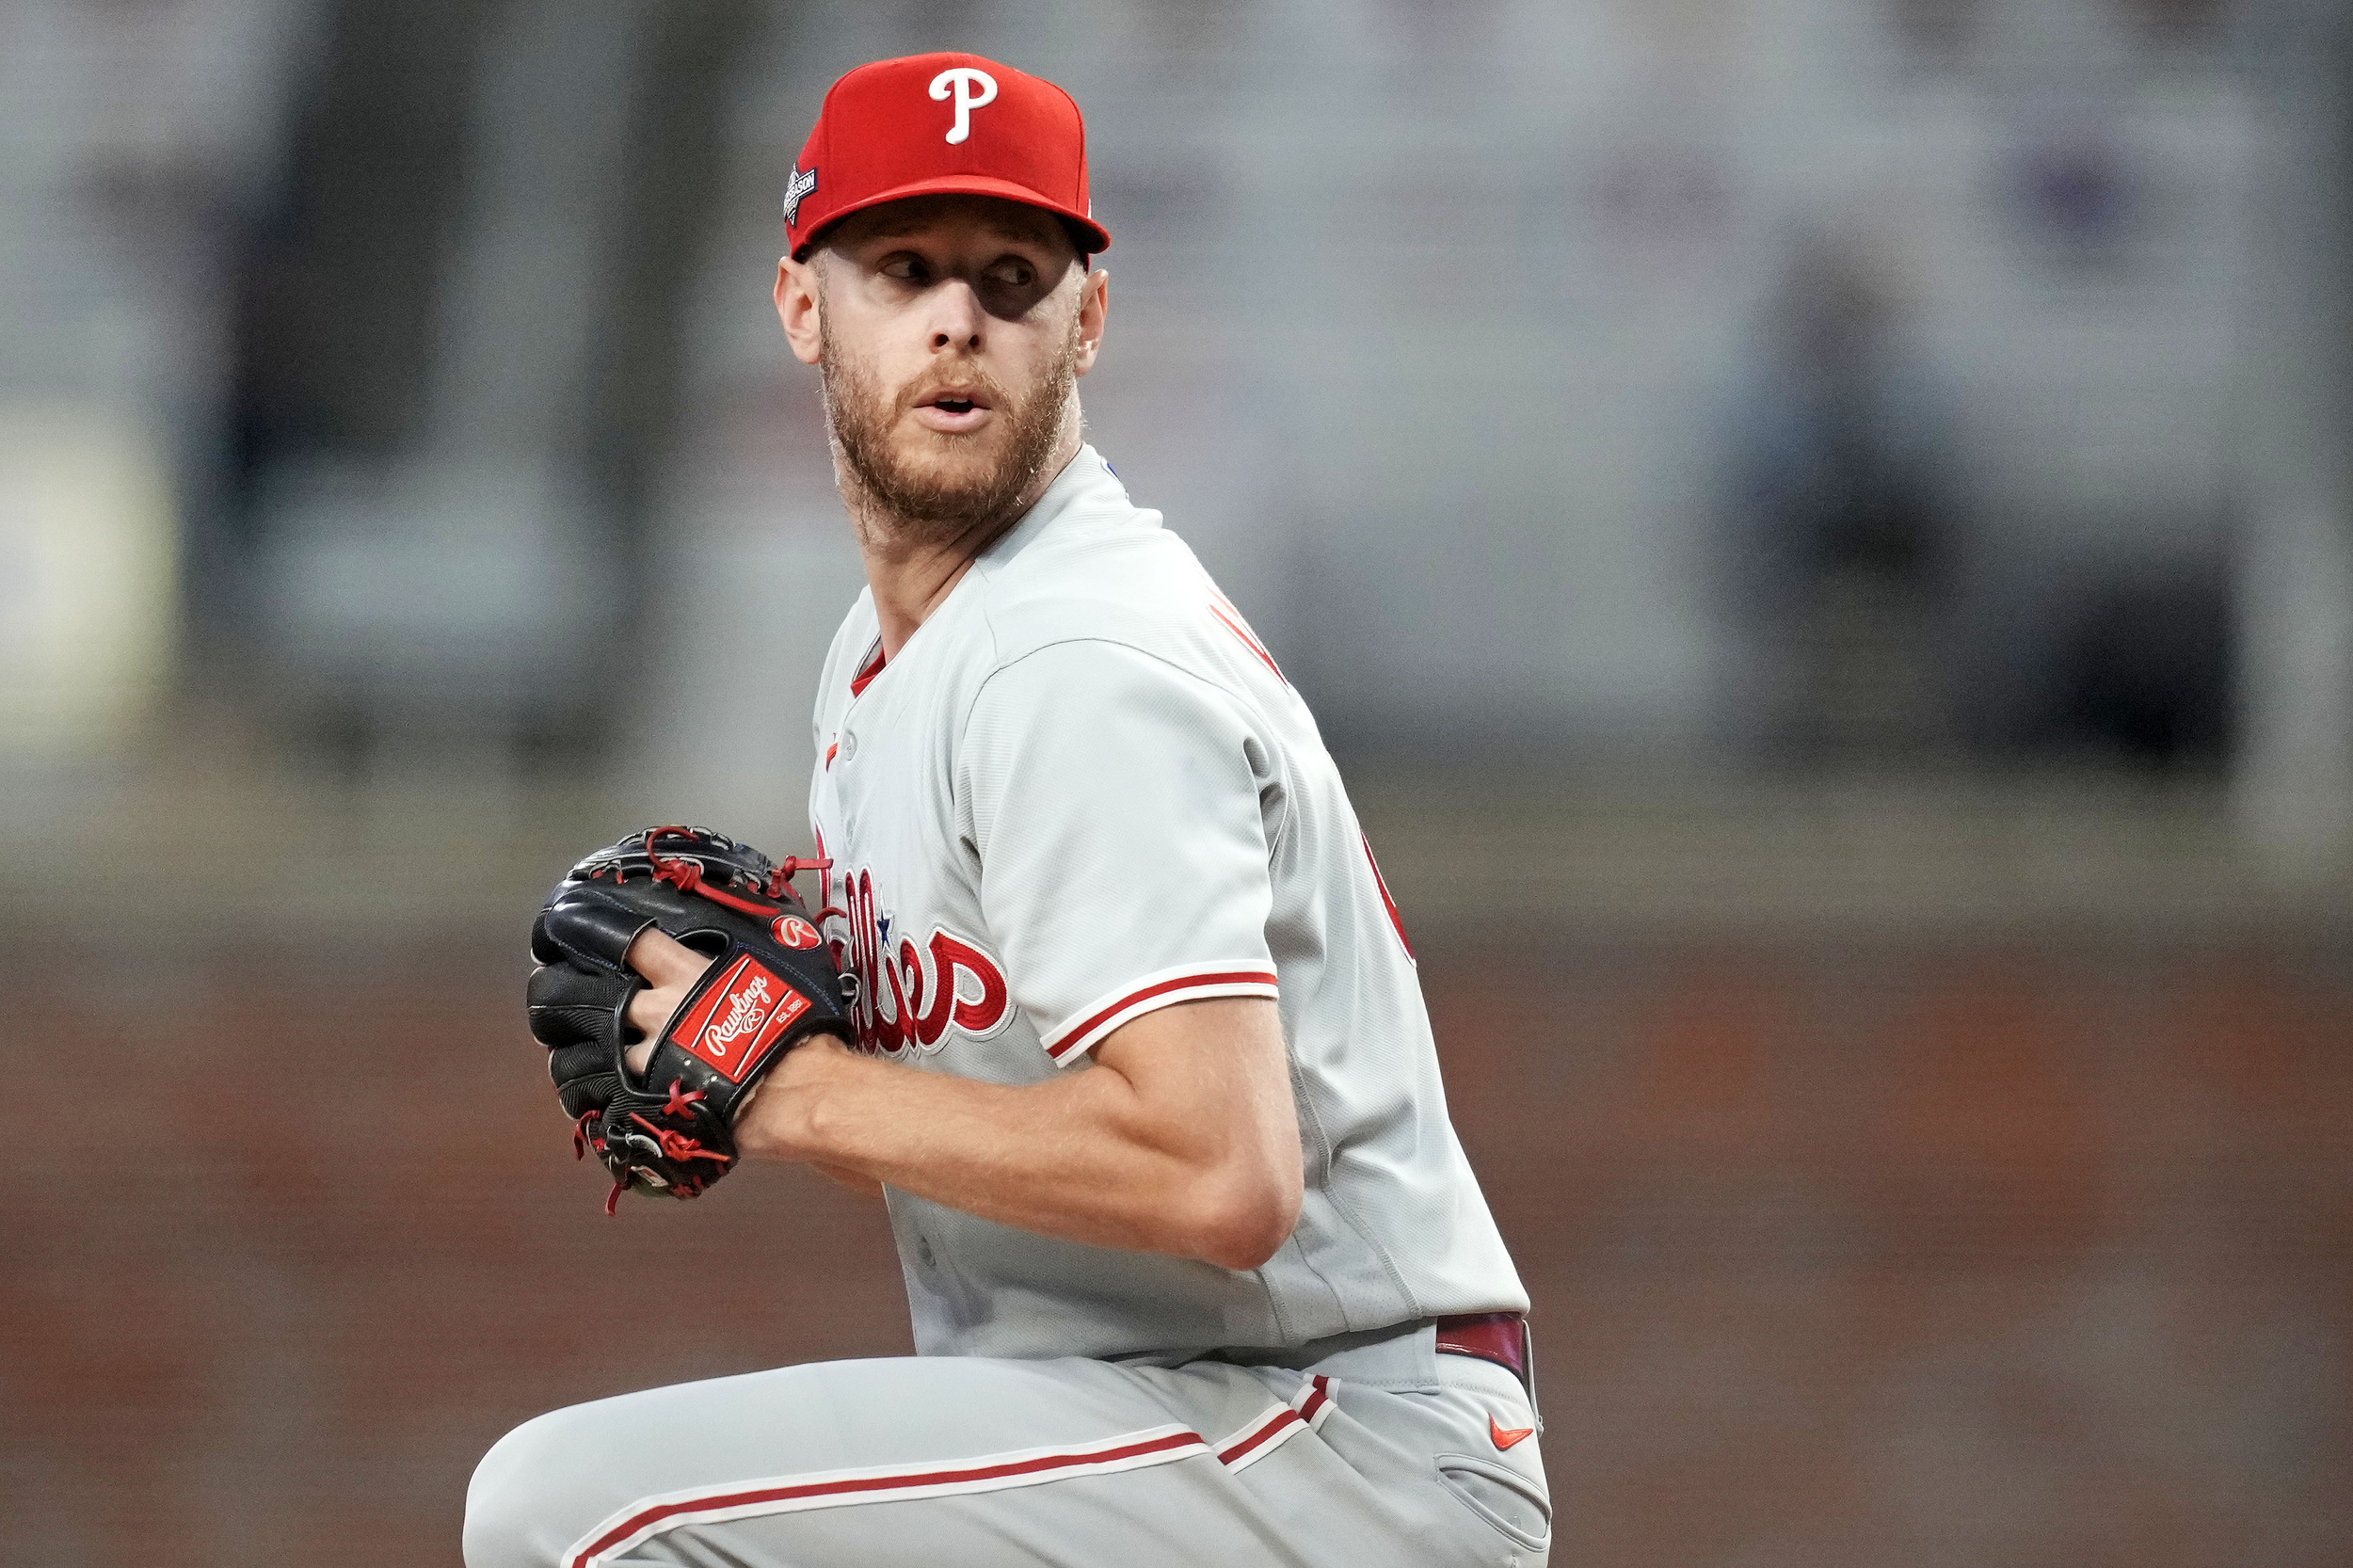 phillies sign one-time all-star sp to record extension